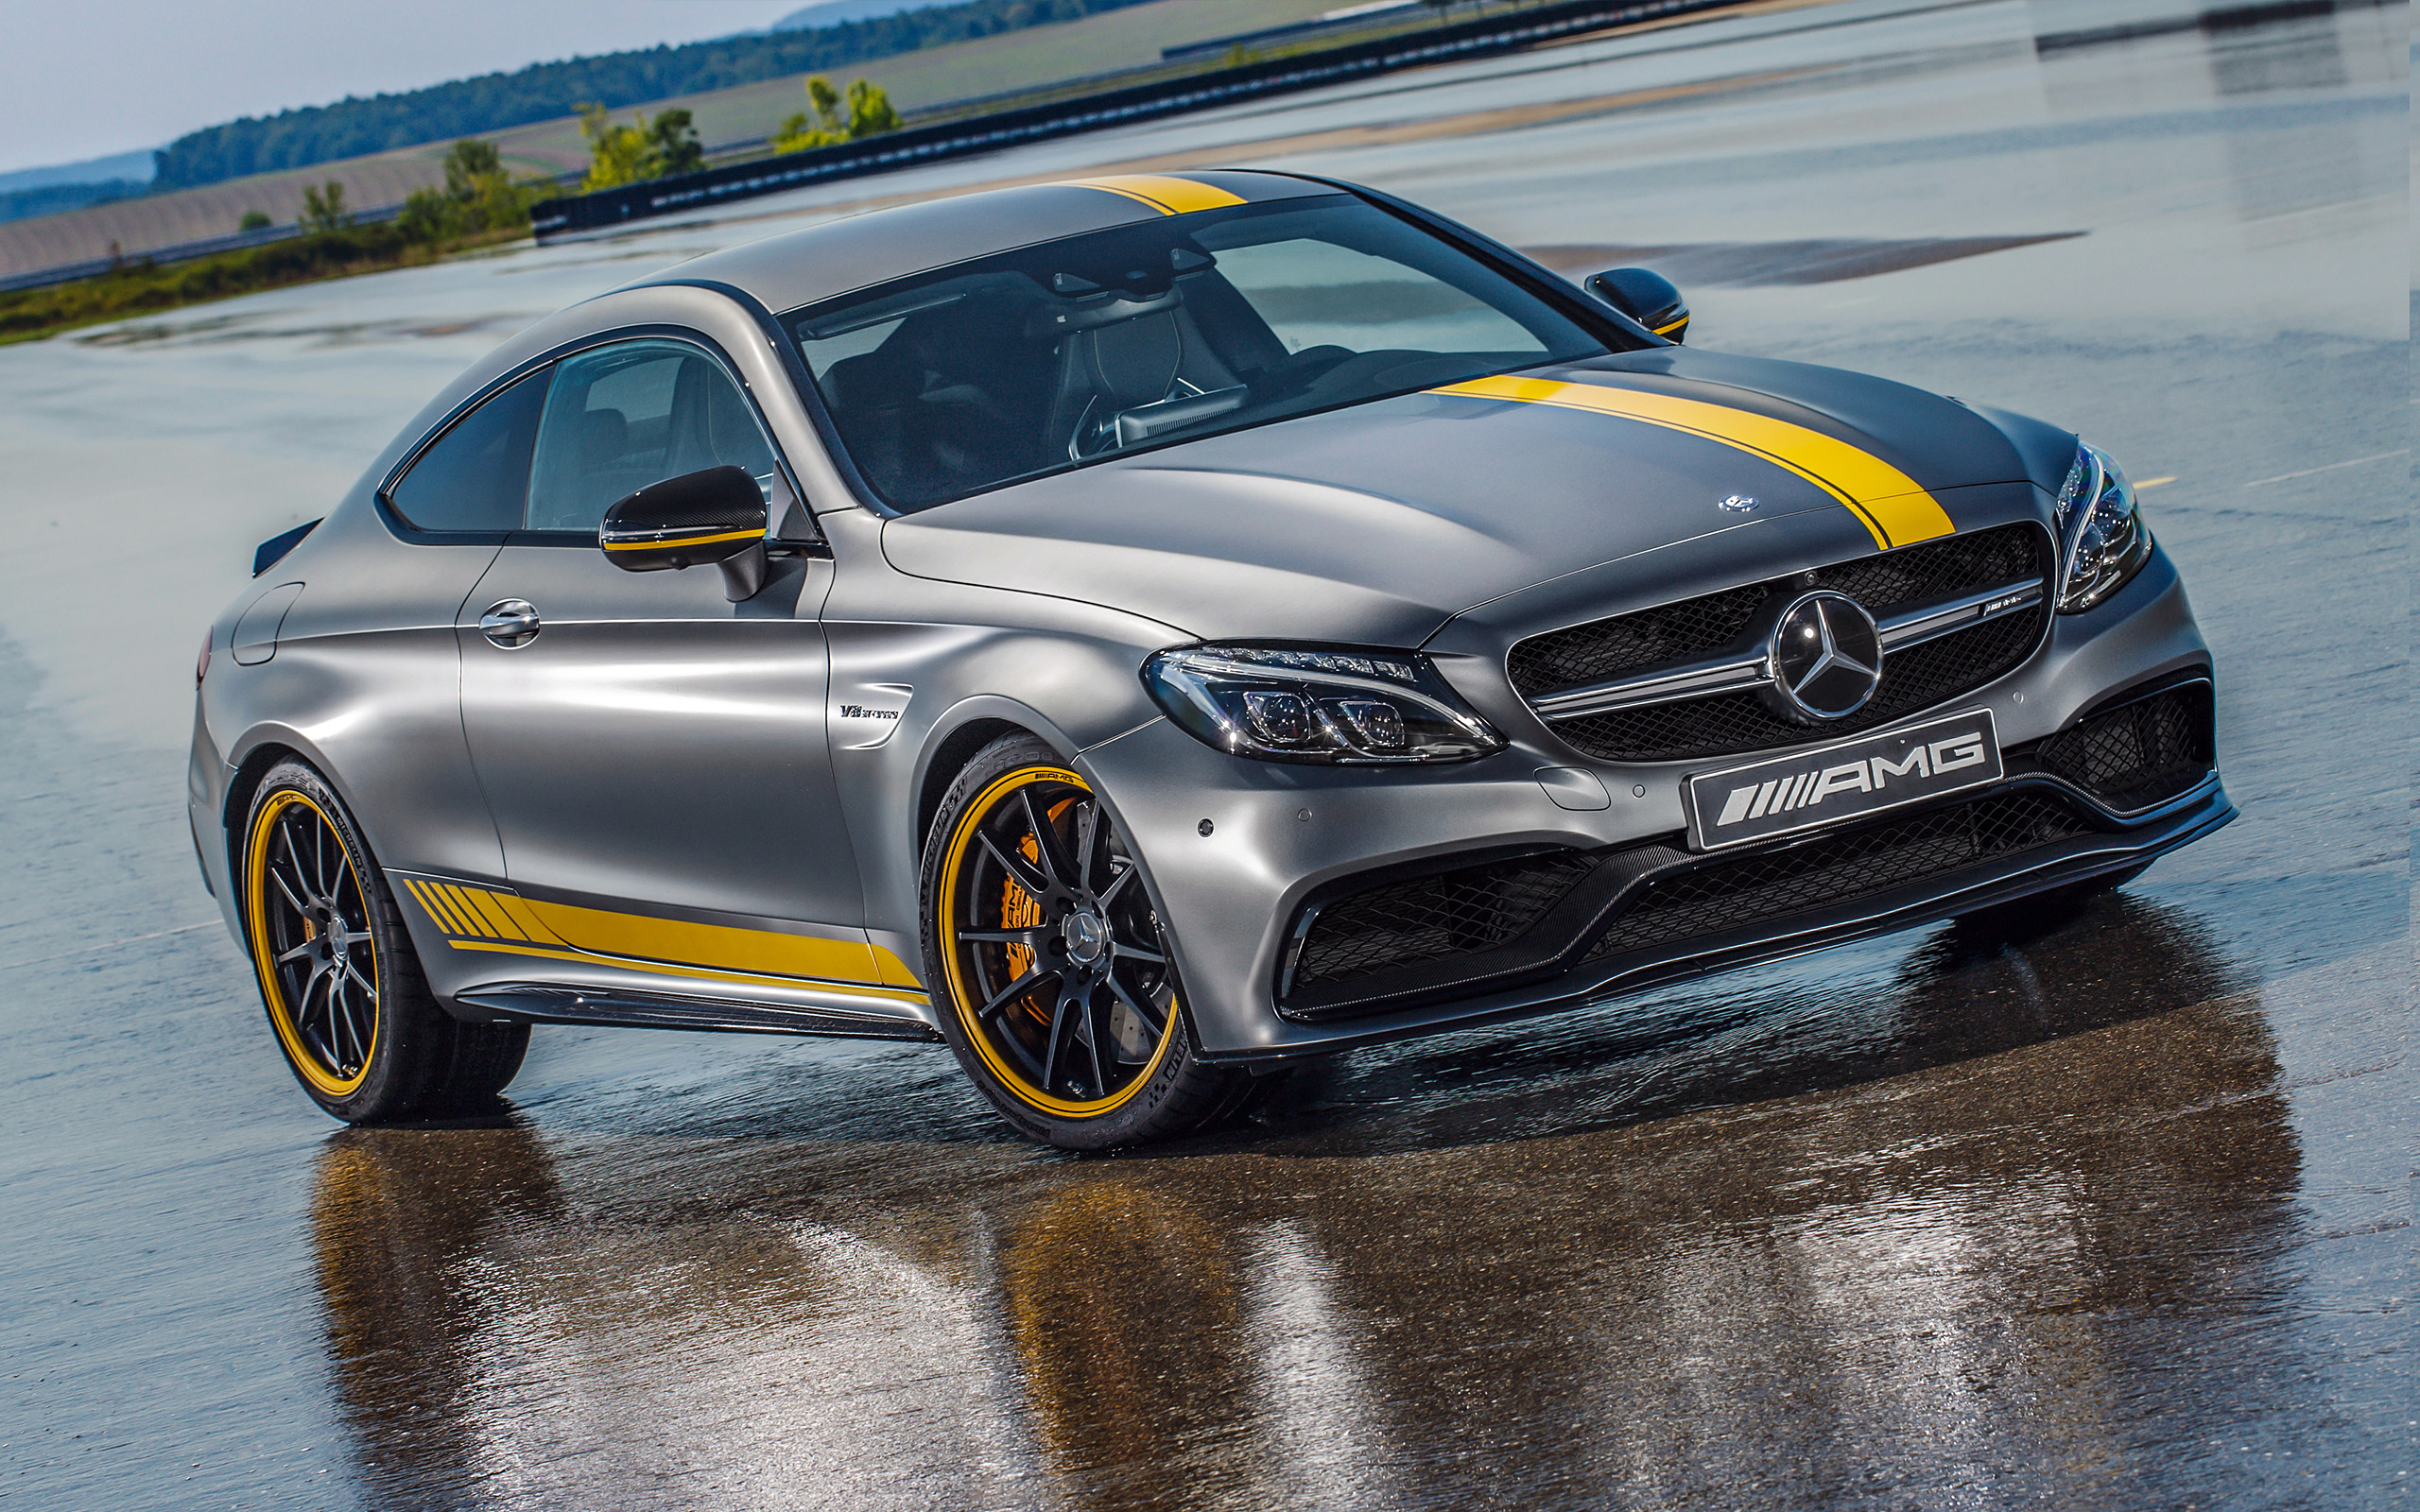 Mercedes Benz C63 Amg Coupe Edition Wallpaper Supercars